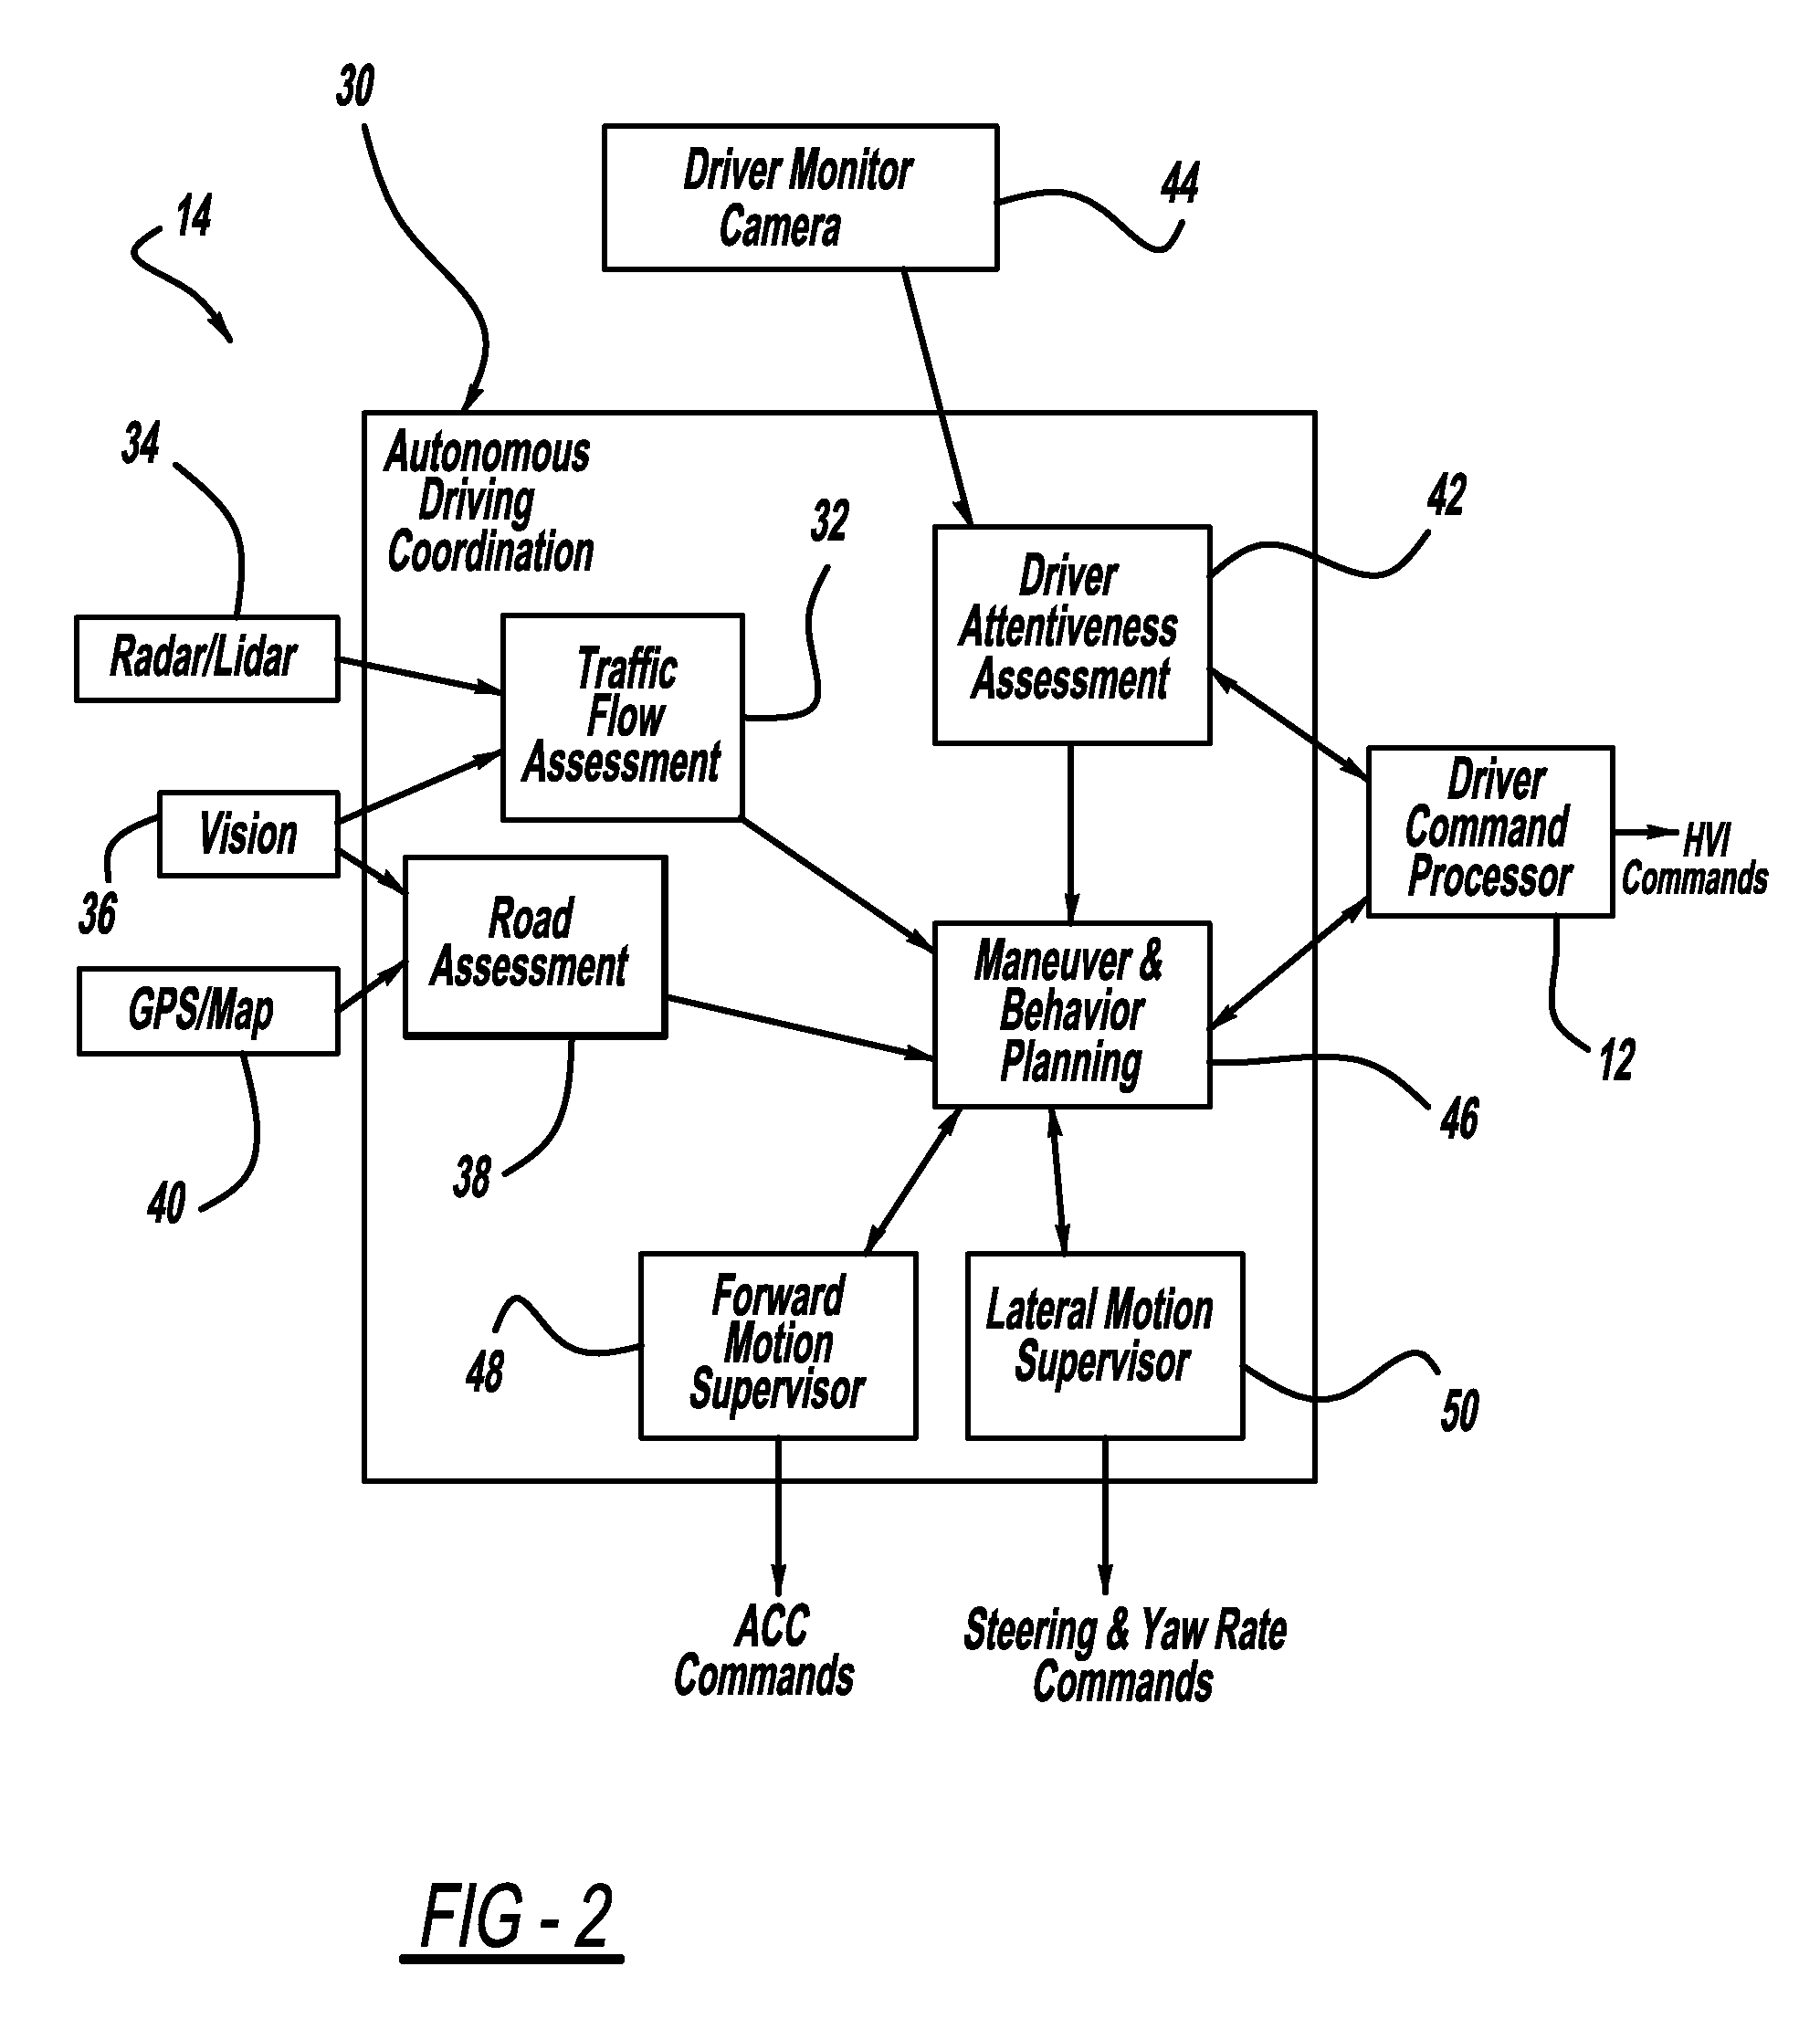 Method and apparatus for driver control of a limited-ability autonomous vehicle